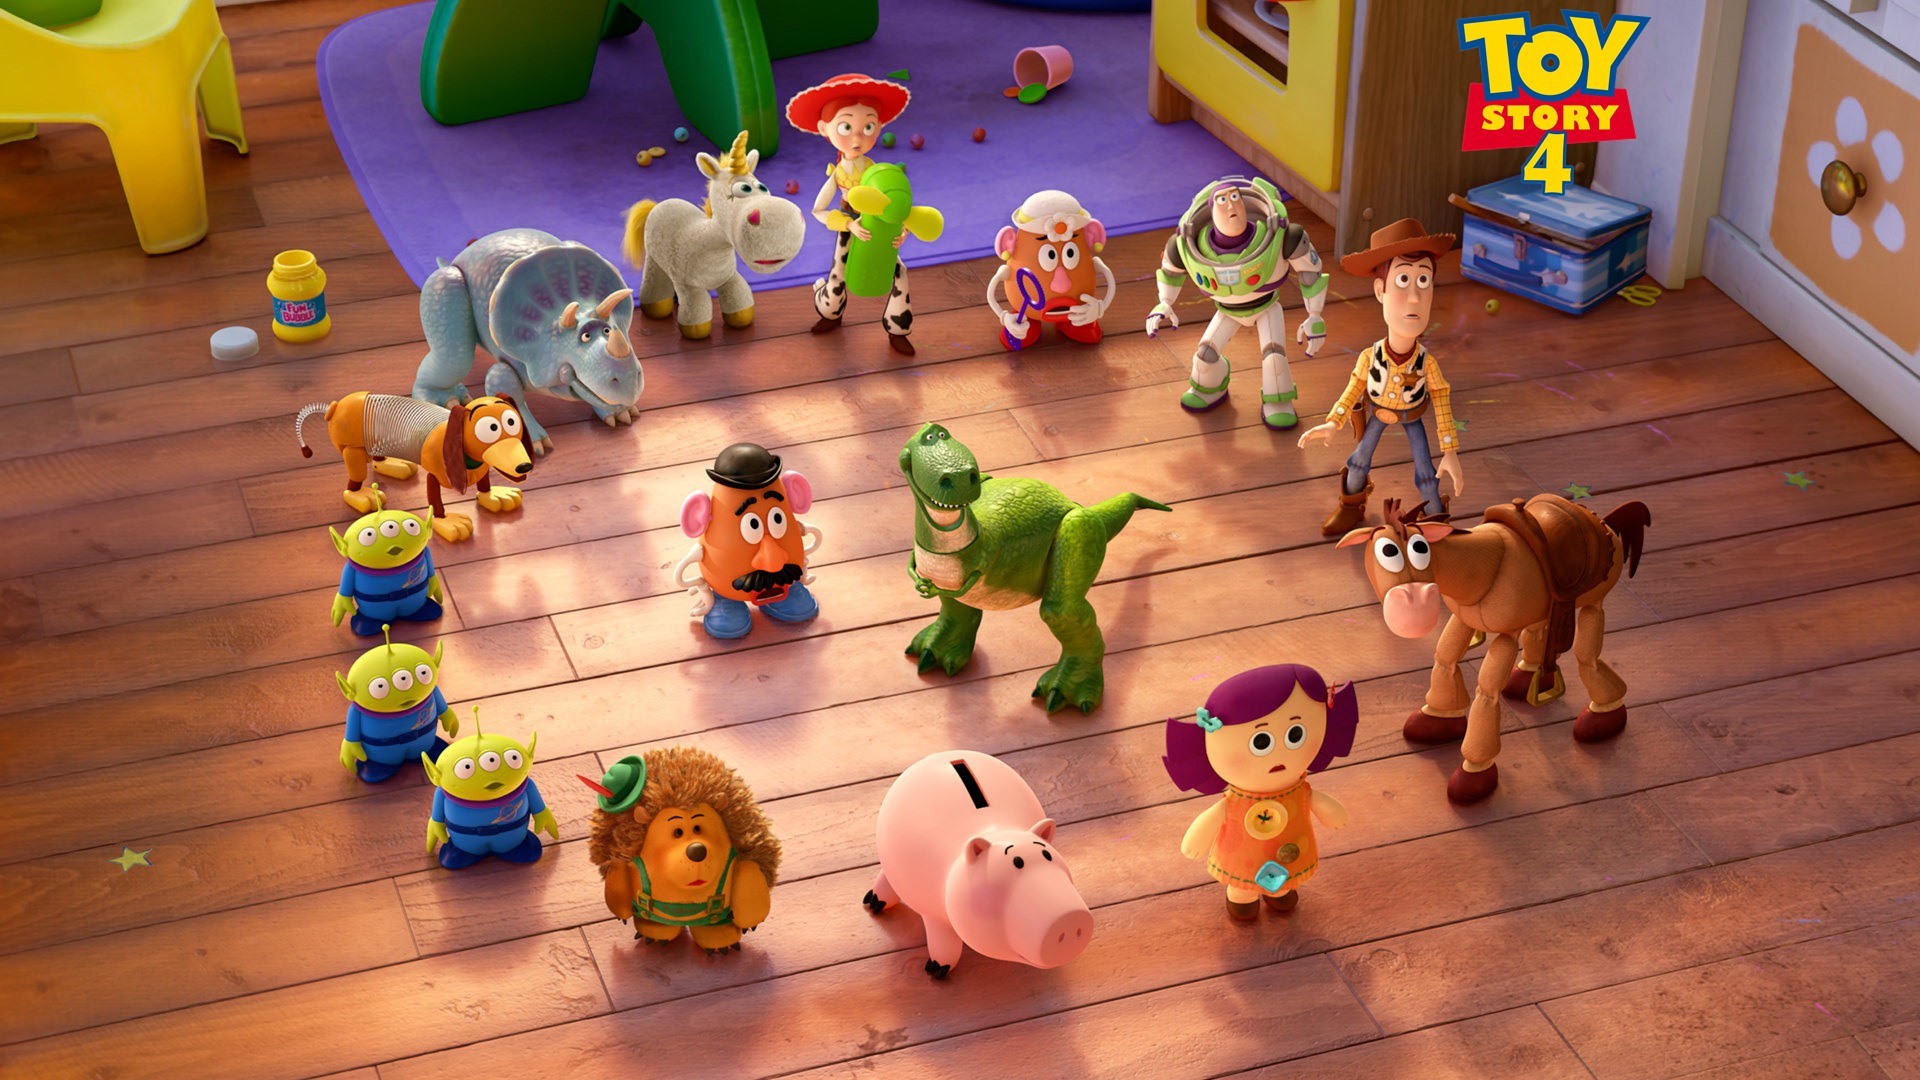 1920x1080 Toy Story 4 Wallpaper